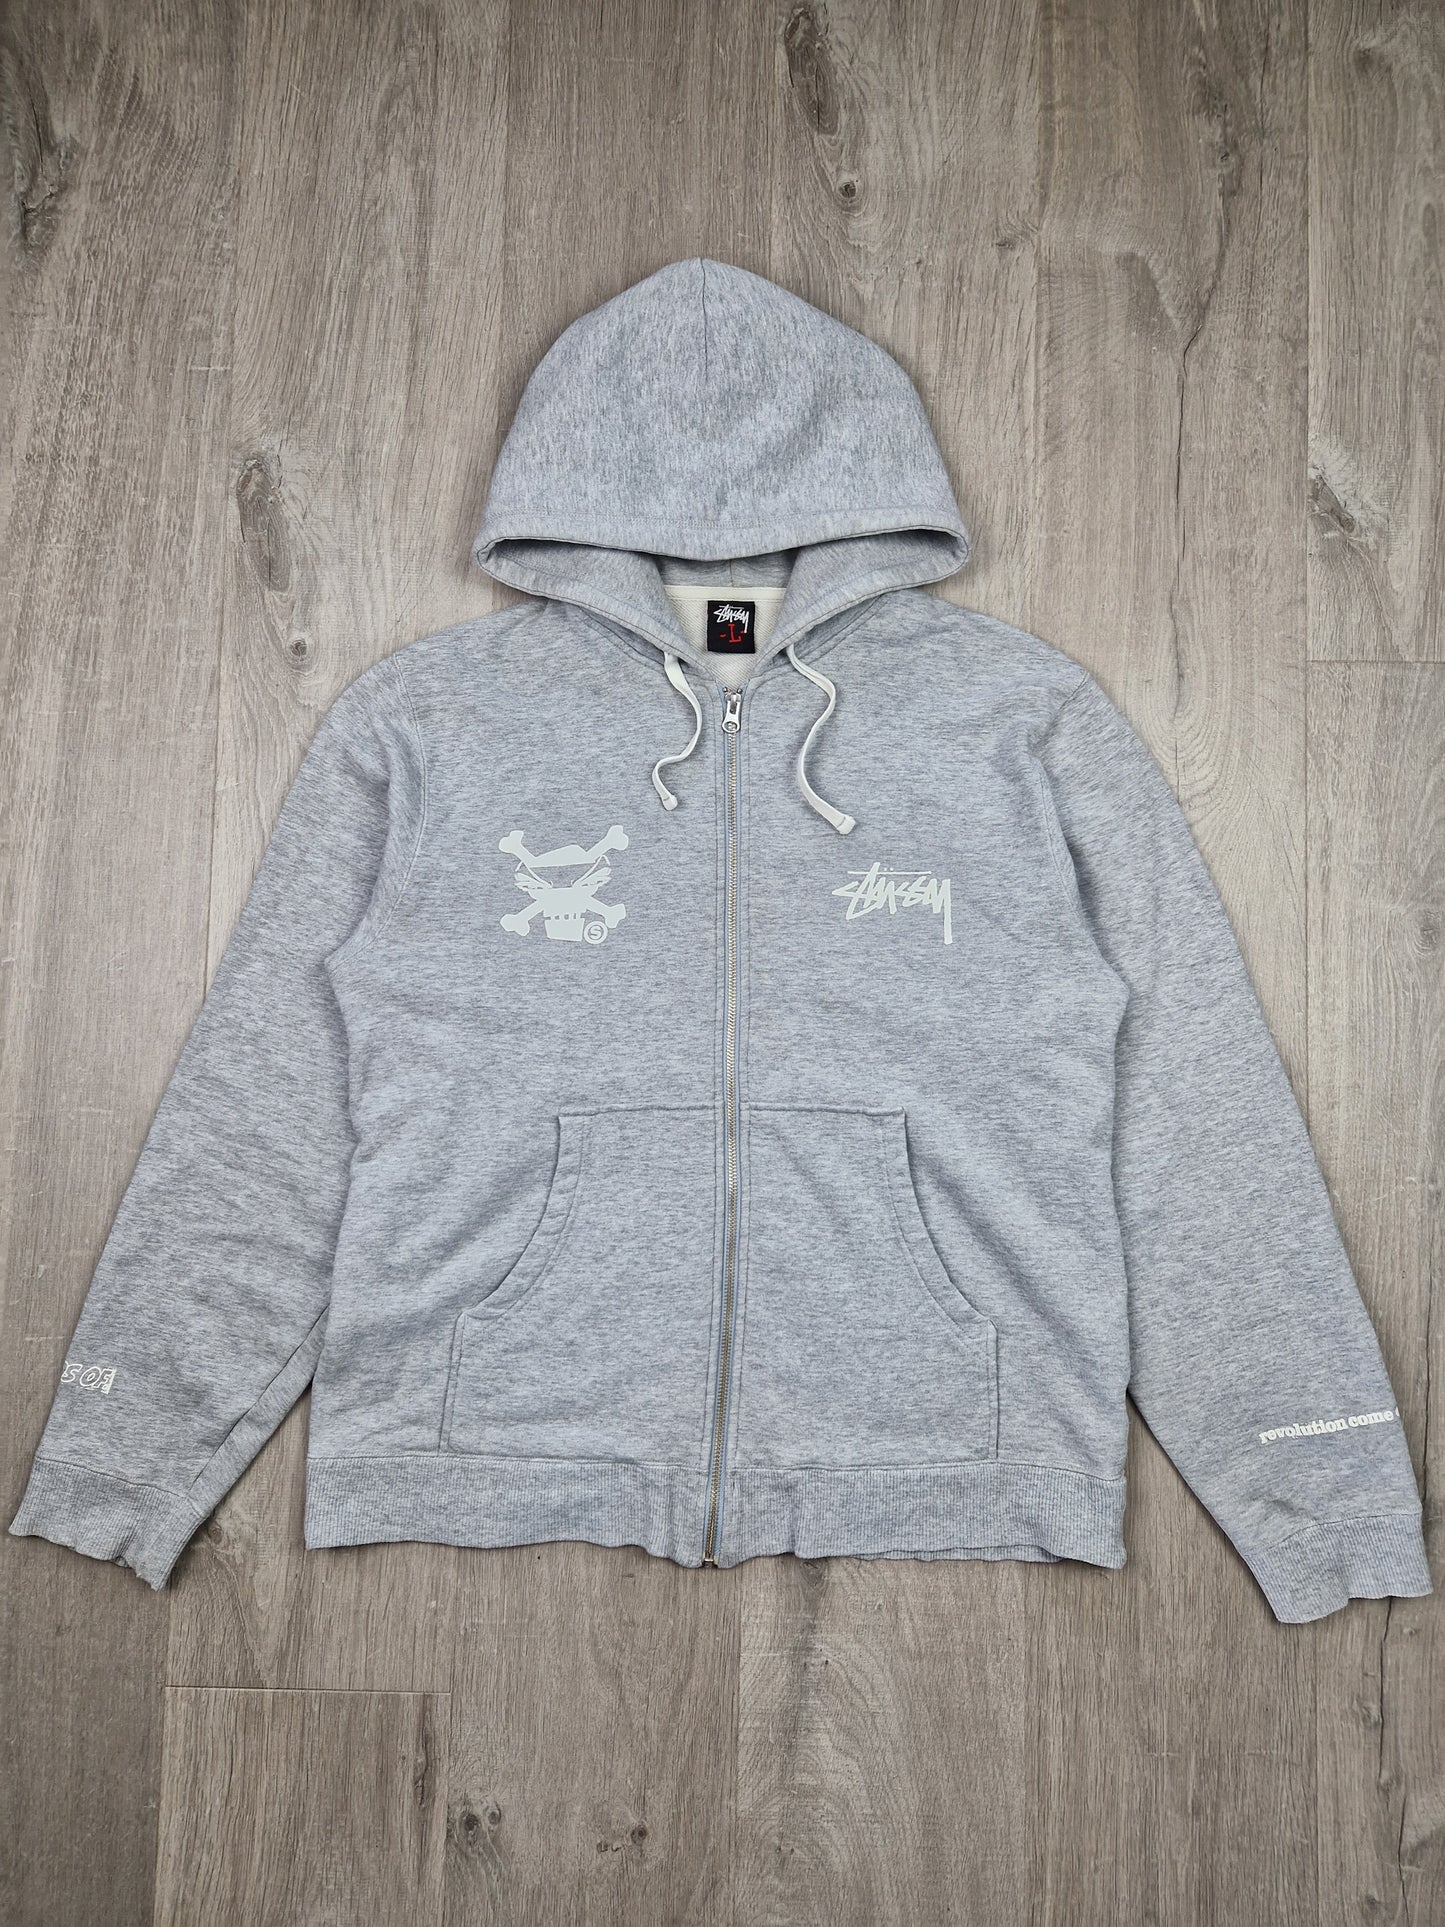 Vintage Stussy x Battle Axes limited edition hoodie (L/M)